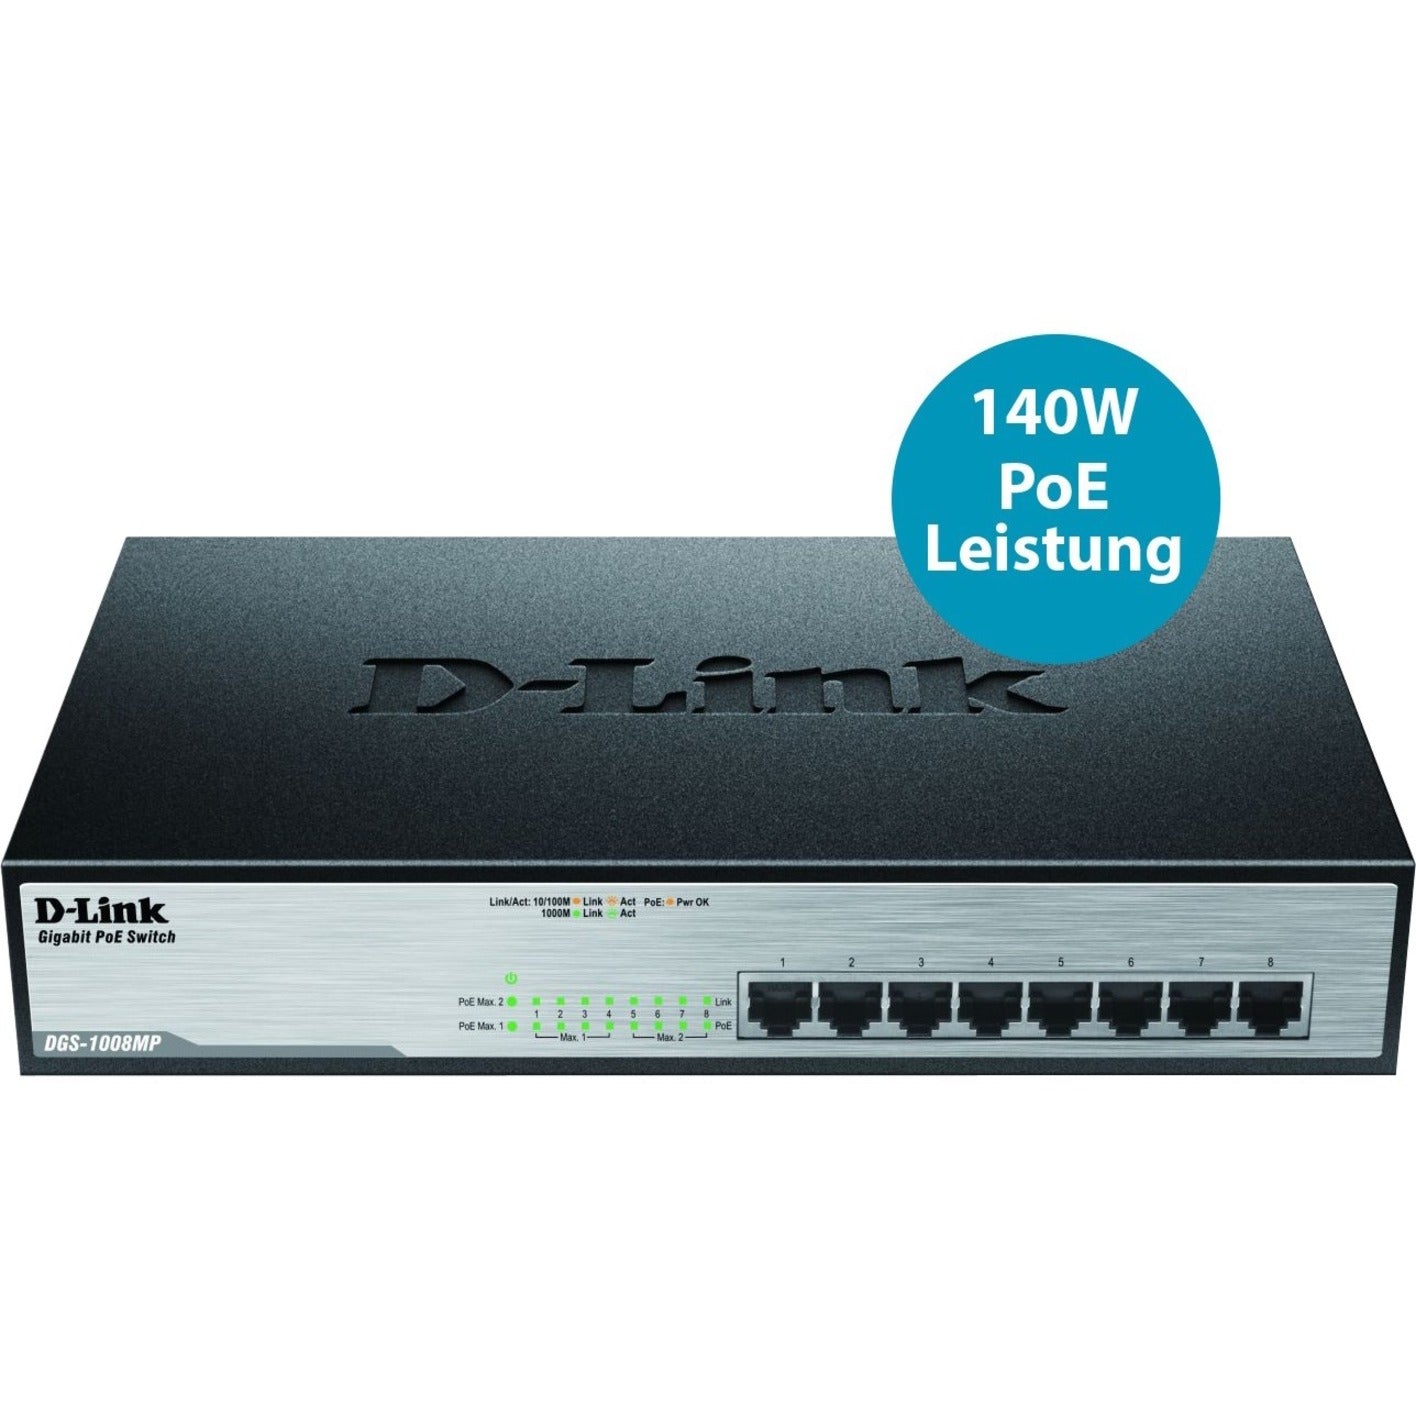 D-Link DGS-1008MP 8-Ports Gigabit Unmanaged Switch with 8 PoE Ports - 802.3at Support, Rack Mount